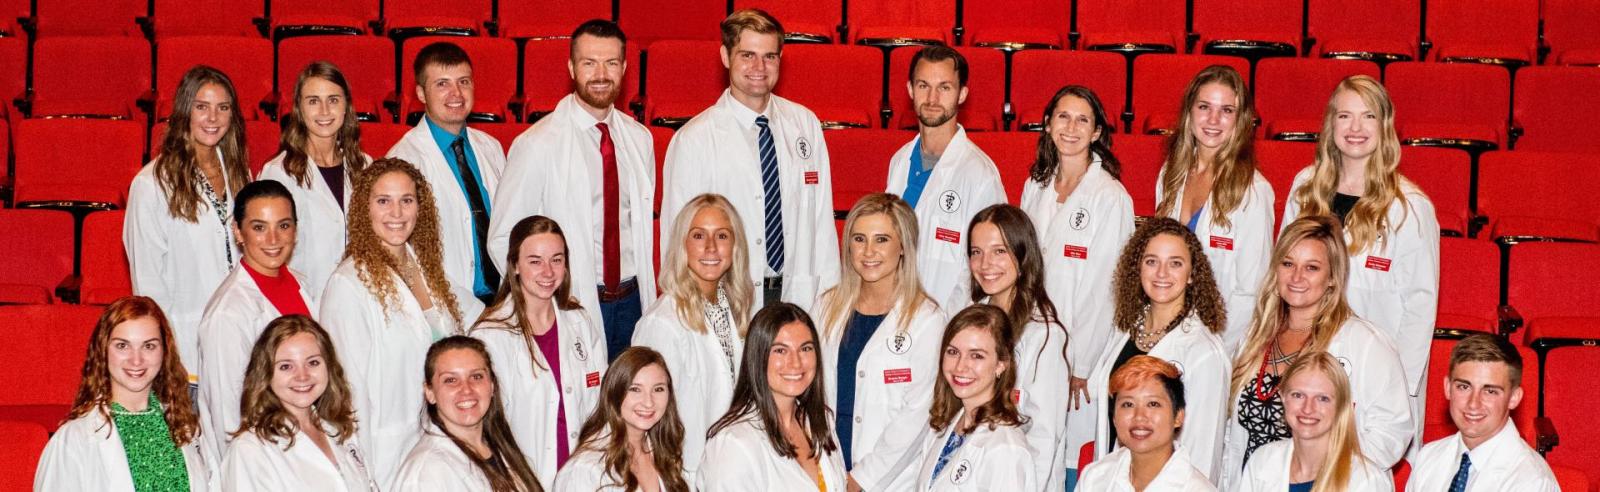 Group picture of members of Class of 2025 at White Coat Ceremony